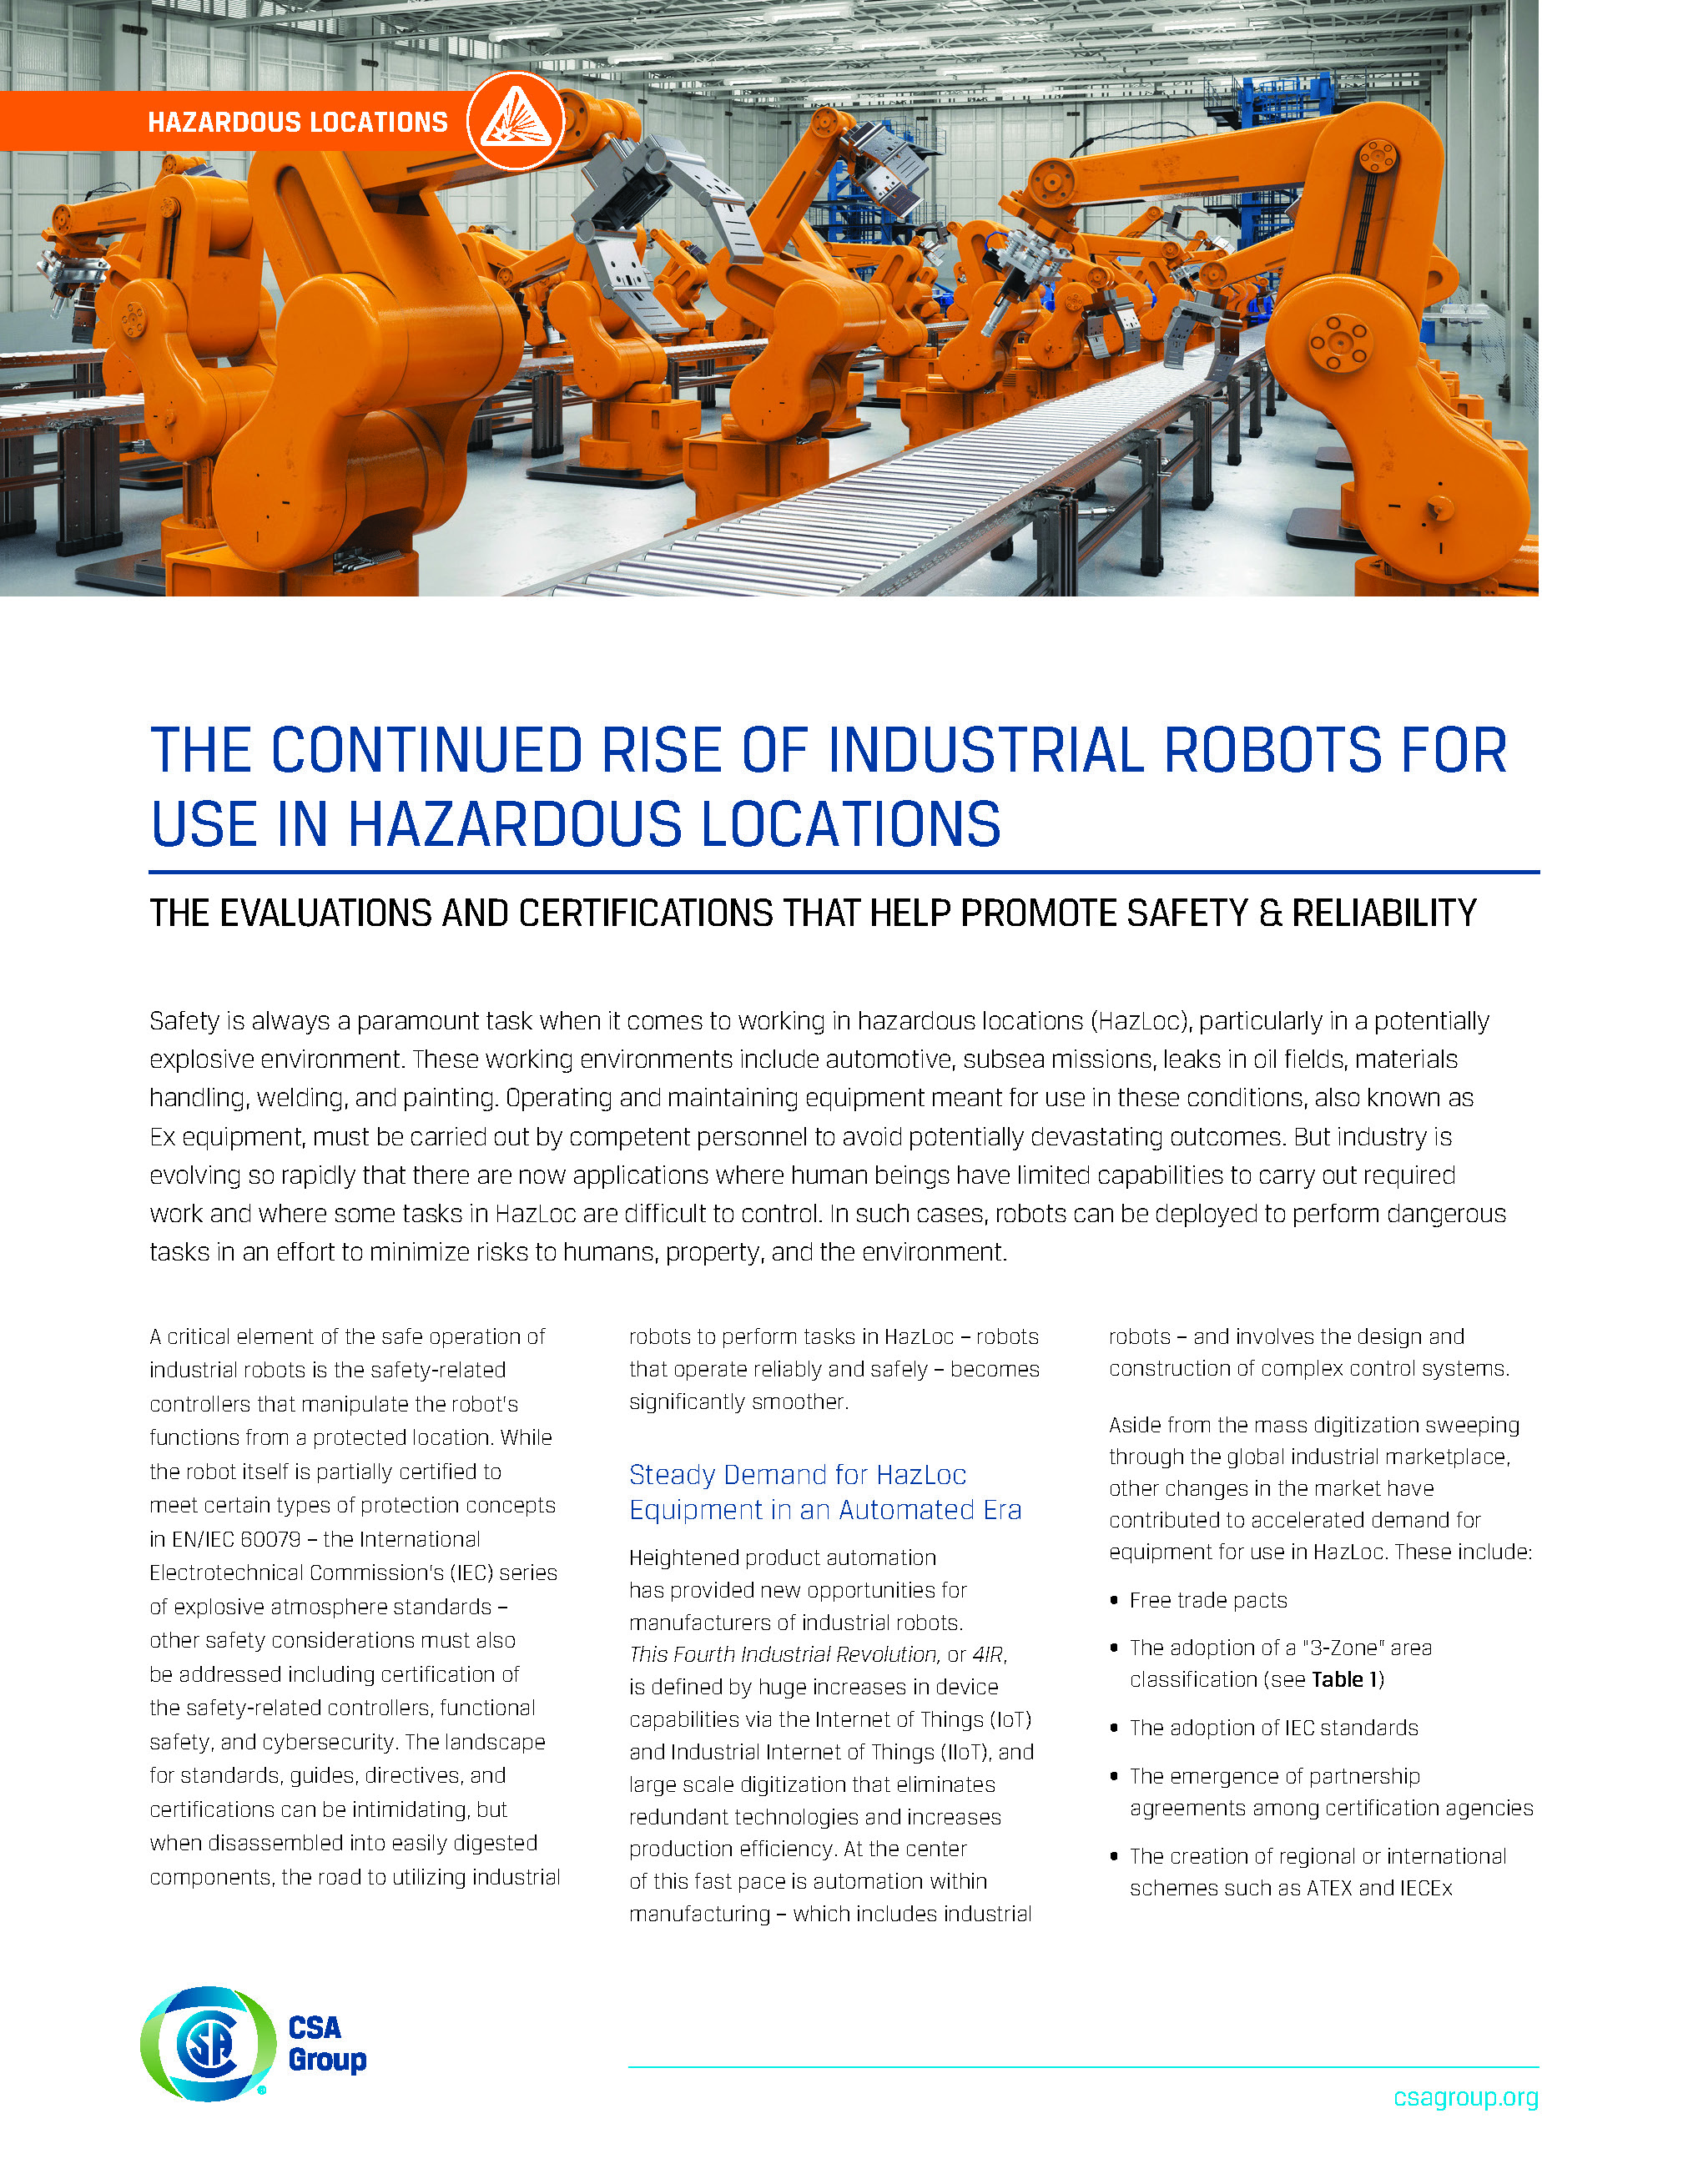 Title page preview of the continues rise of industrial robots for use in Hazardous locations